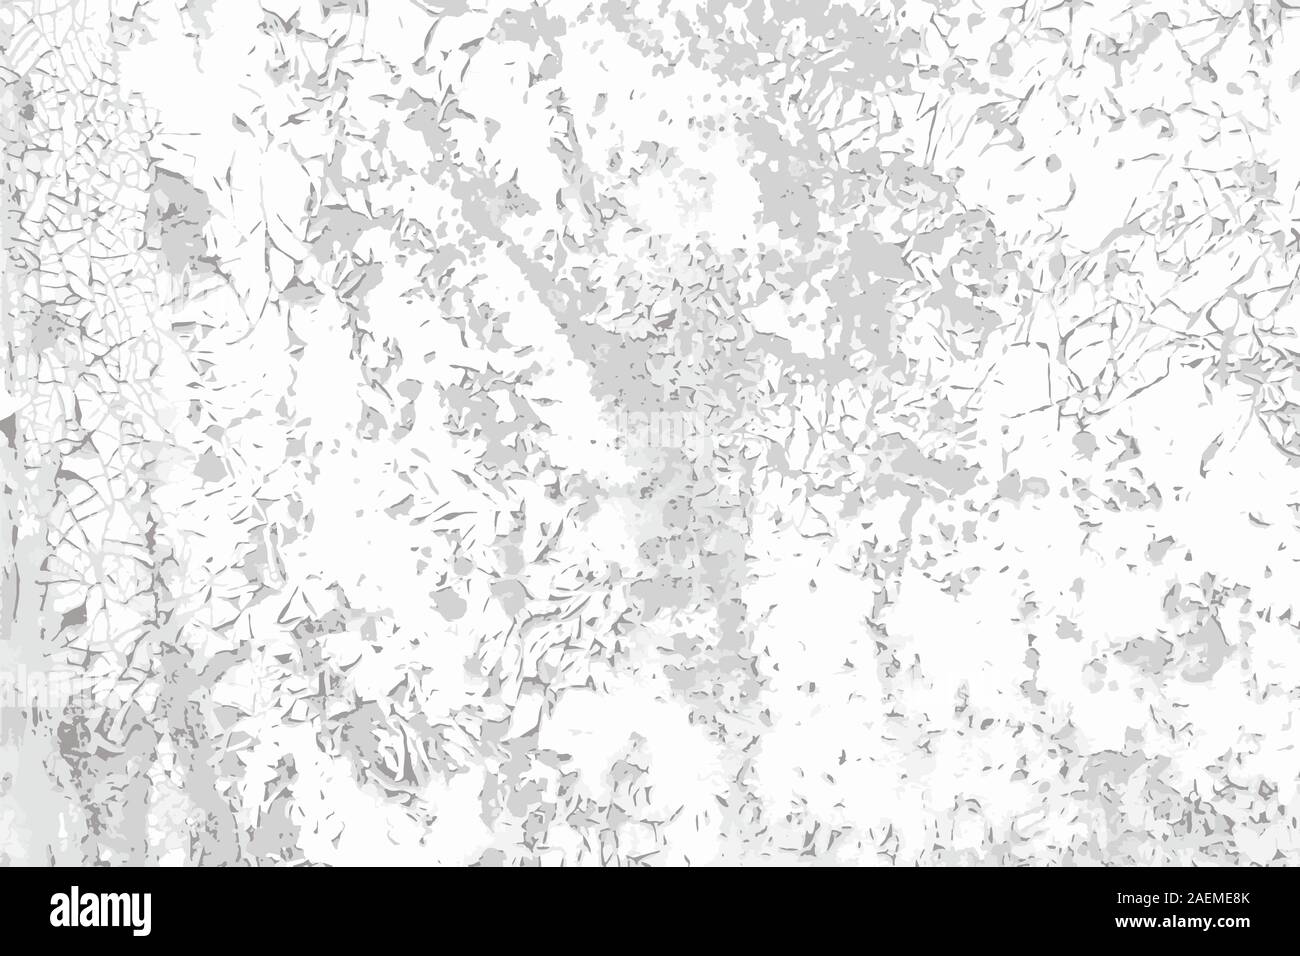 Grunge cracked paint vector black and white texture background. Ttemplate for overlay artwork. Stock Vector